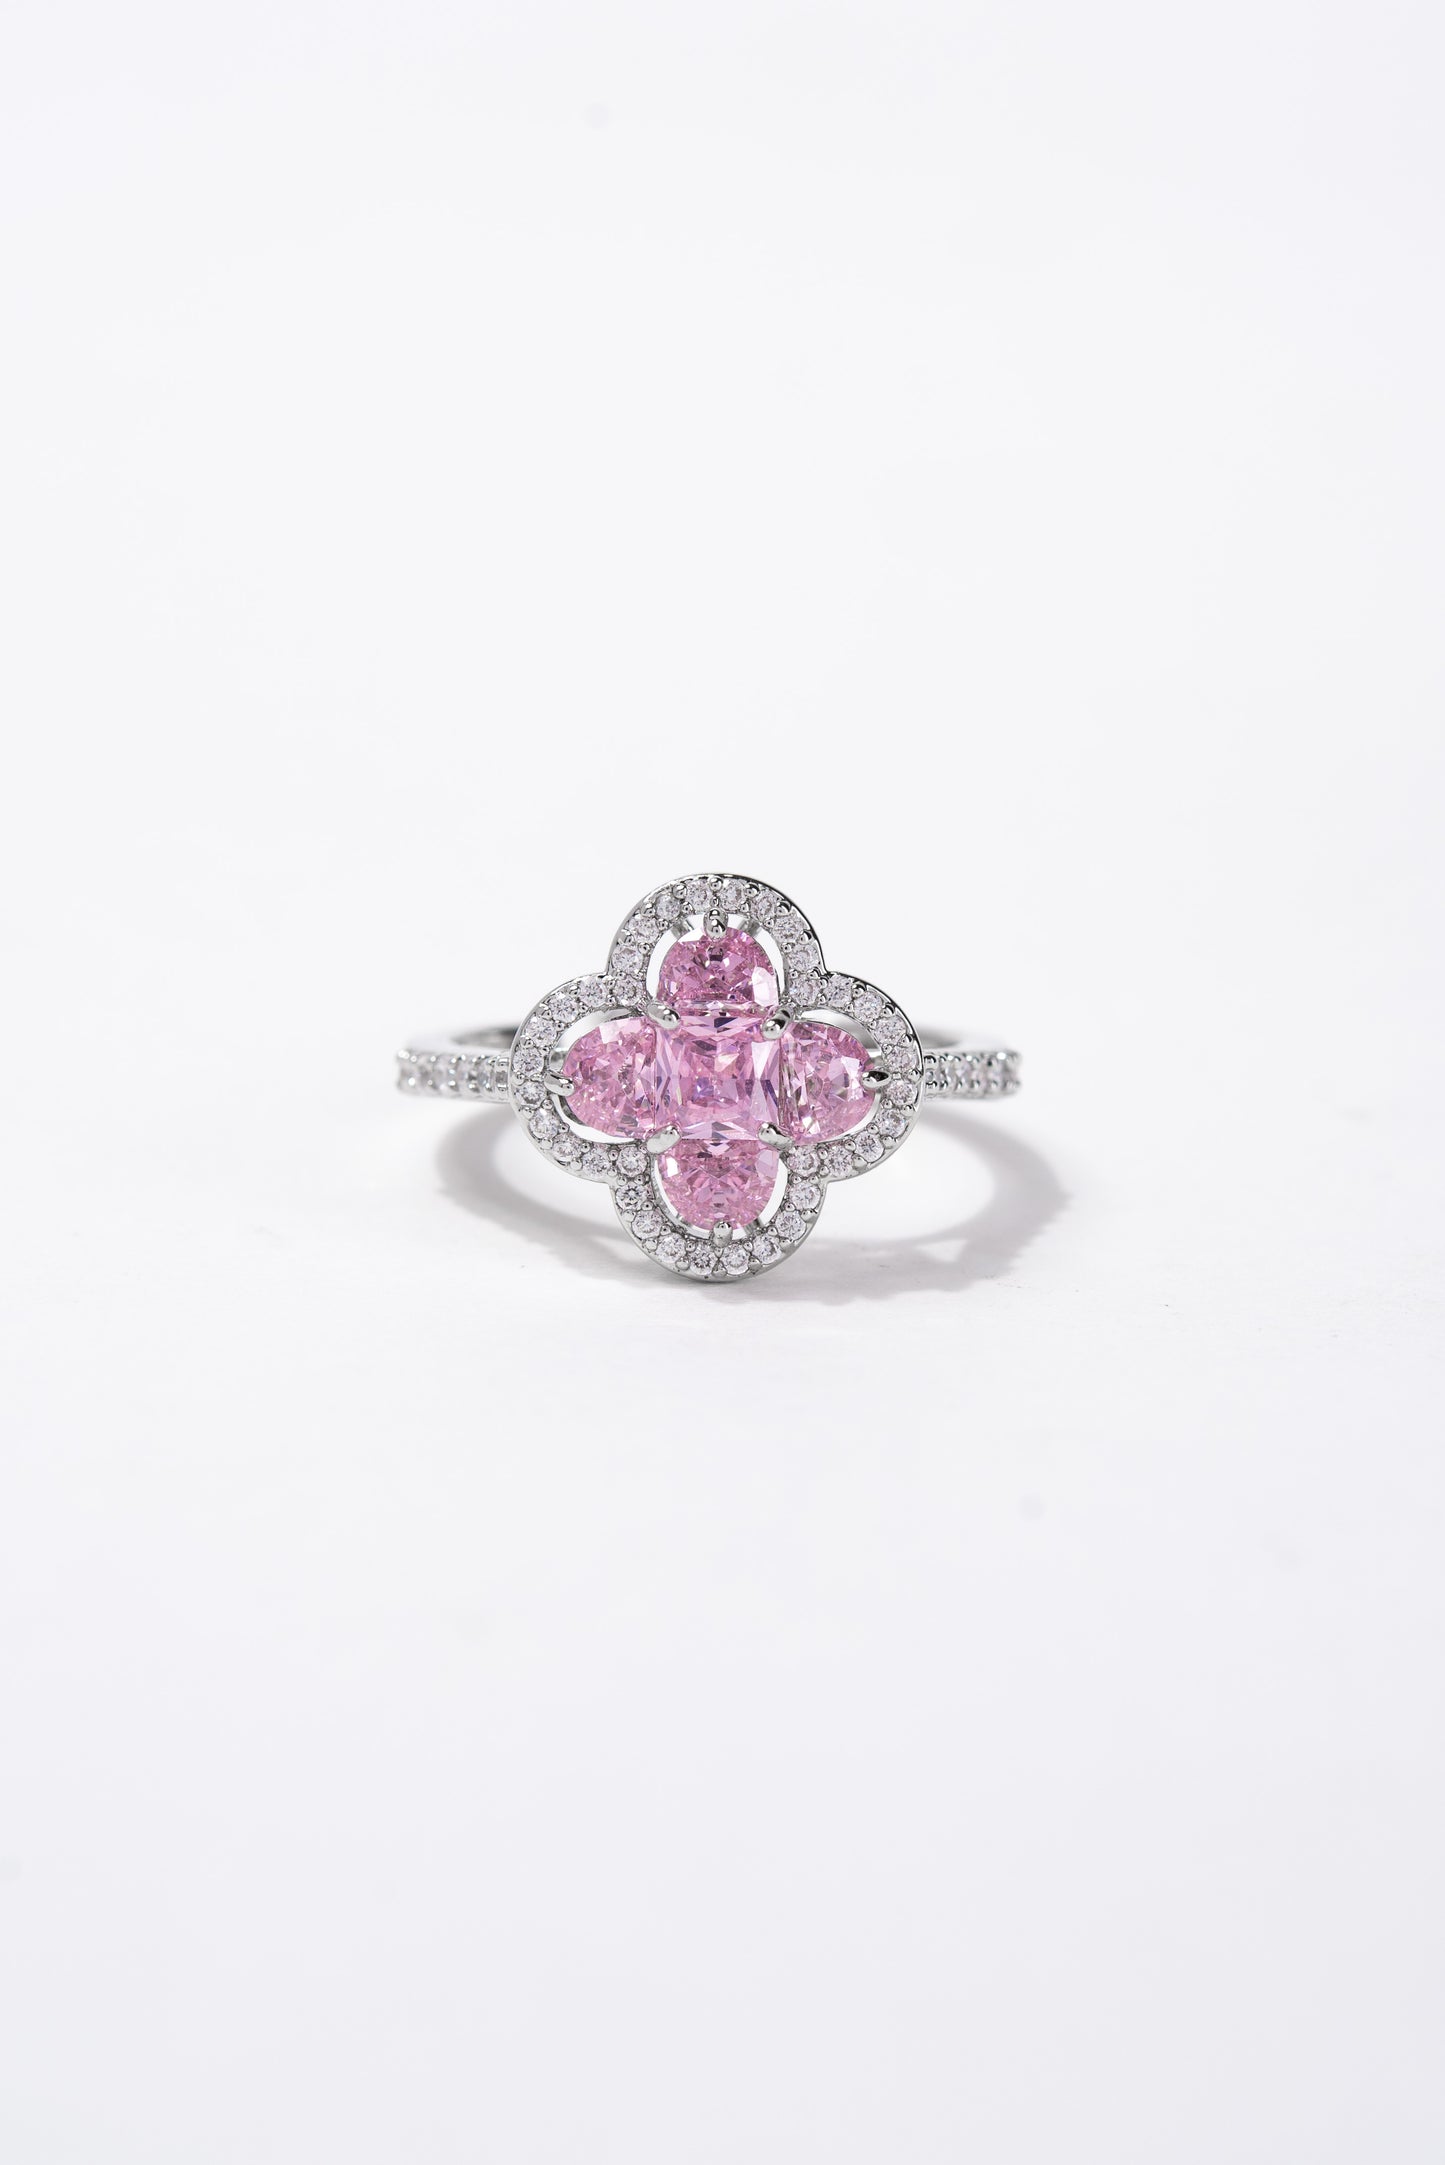 Floral CZ Solitaire Rhinestone Ring